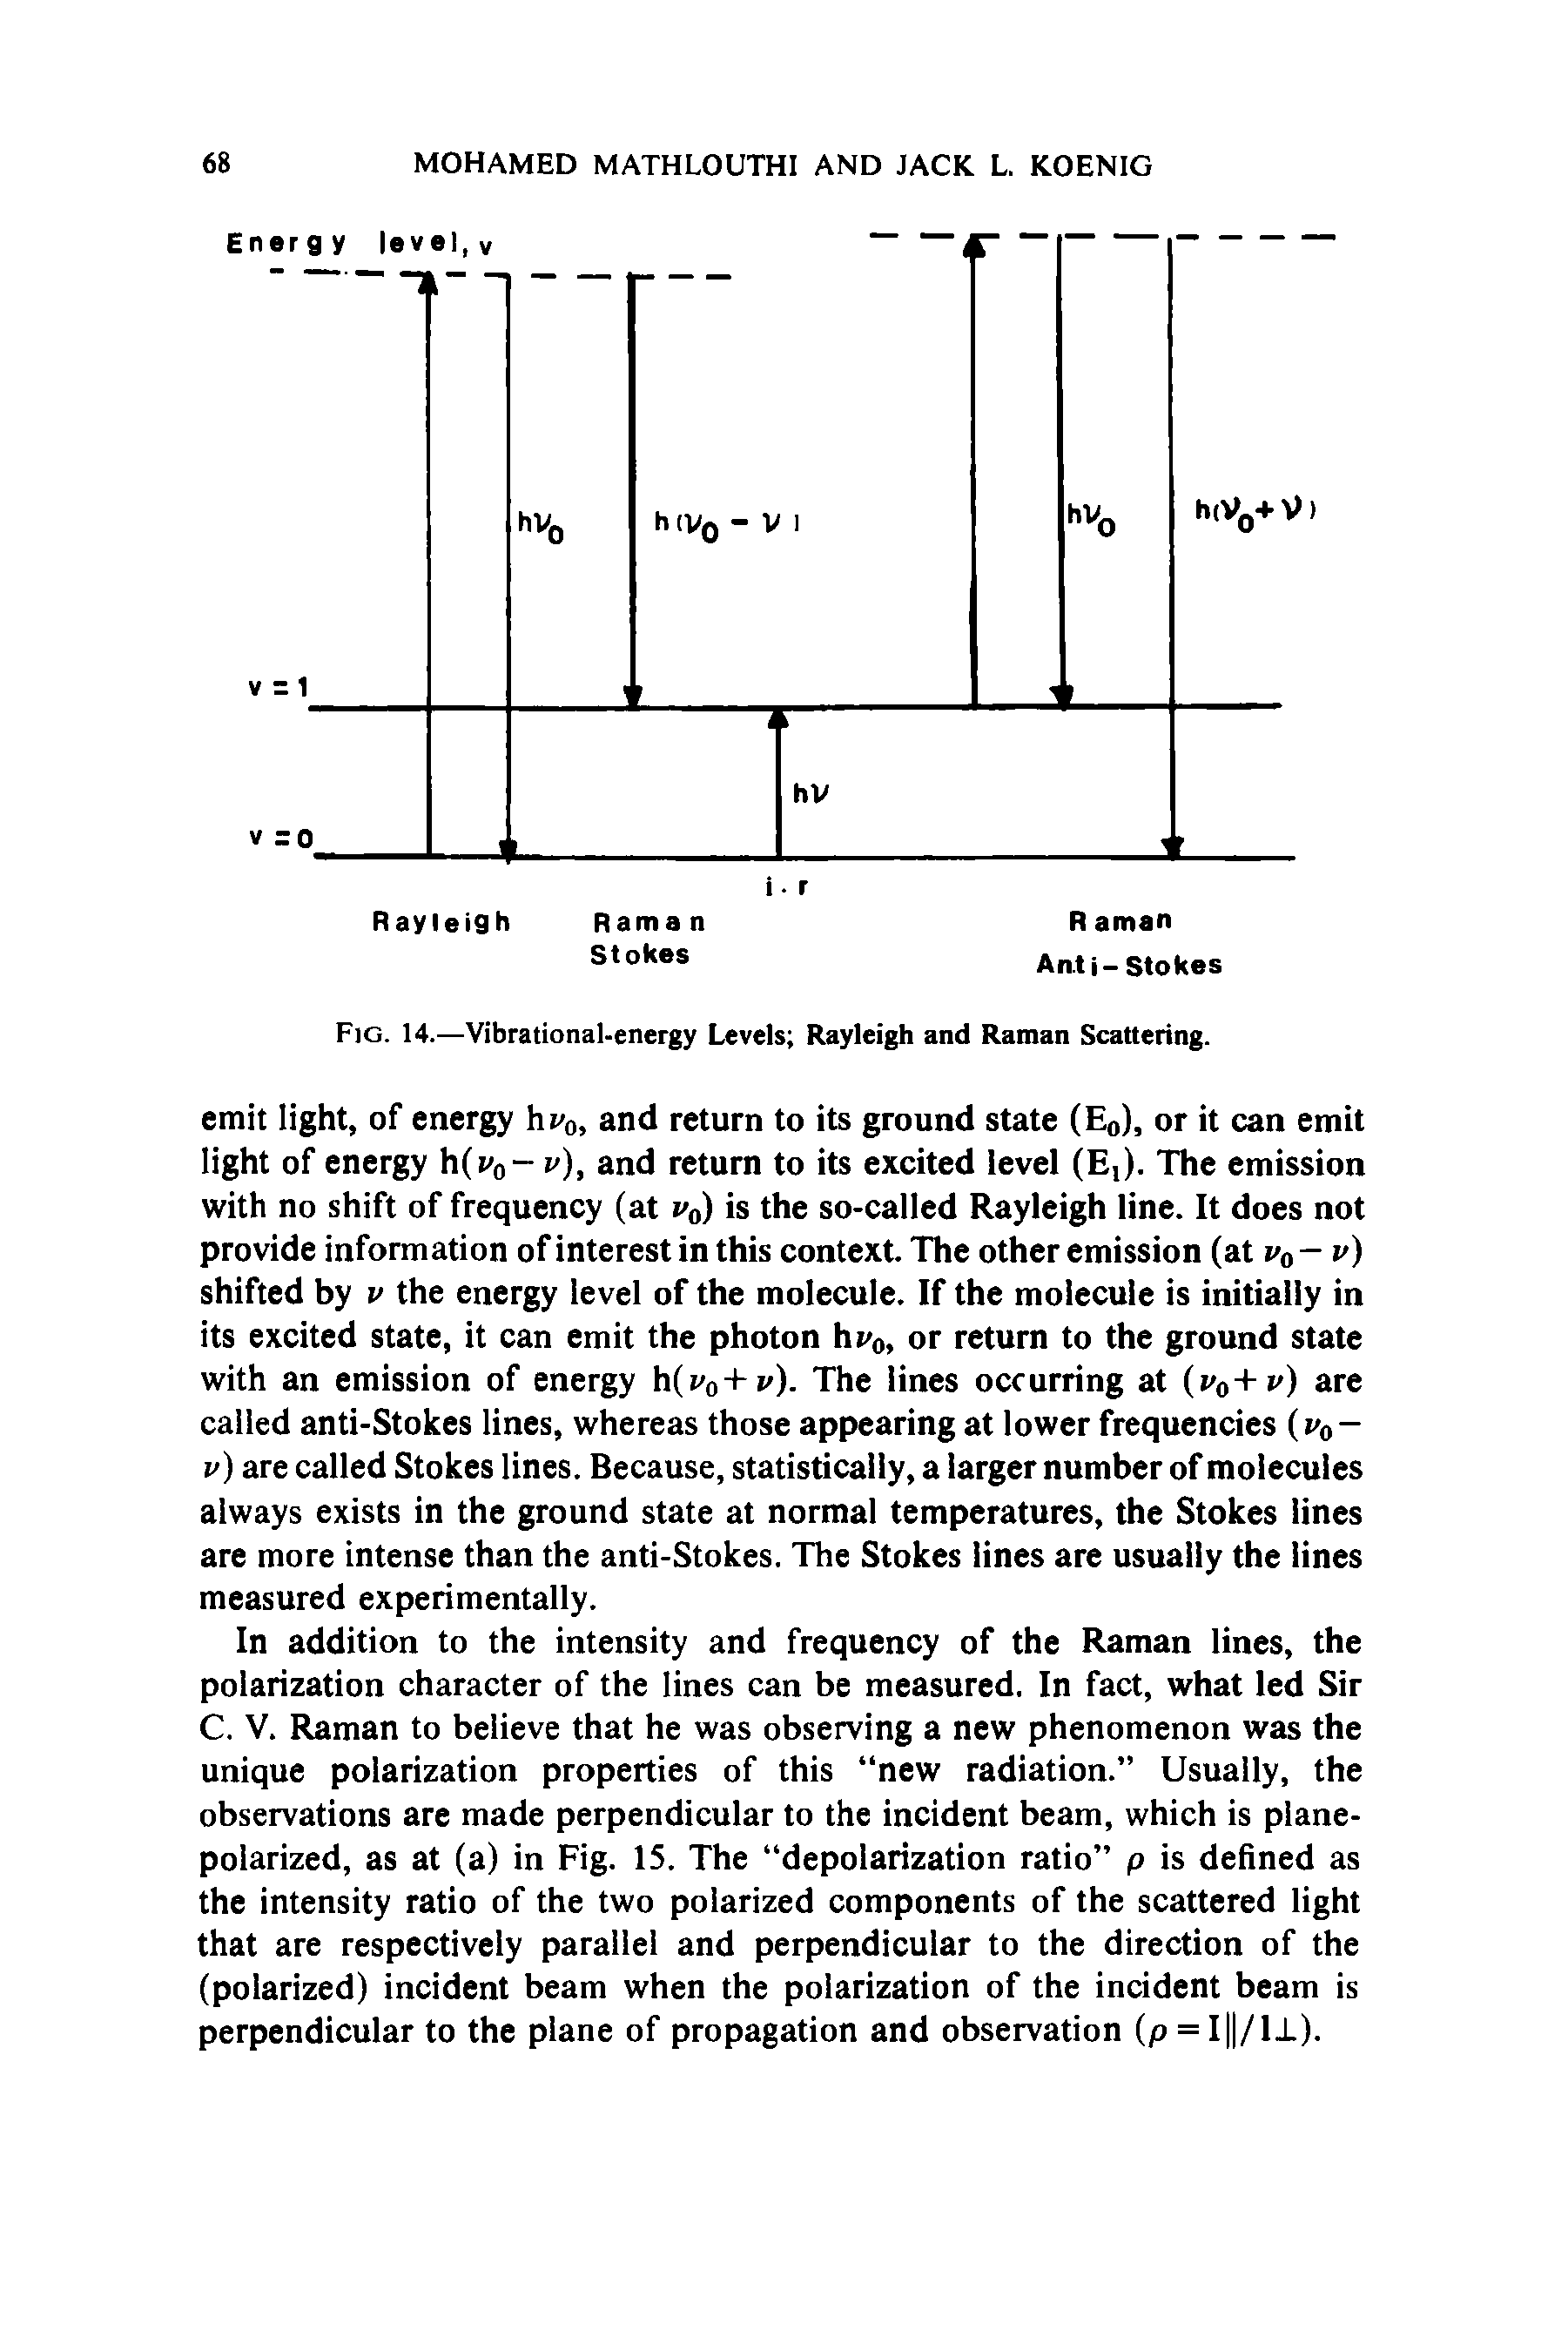 Fig. 14.—Vibrational-energy Levels Rayleigh and Raman Scattering.